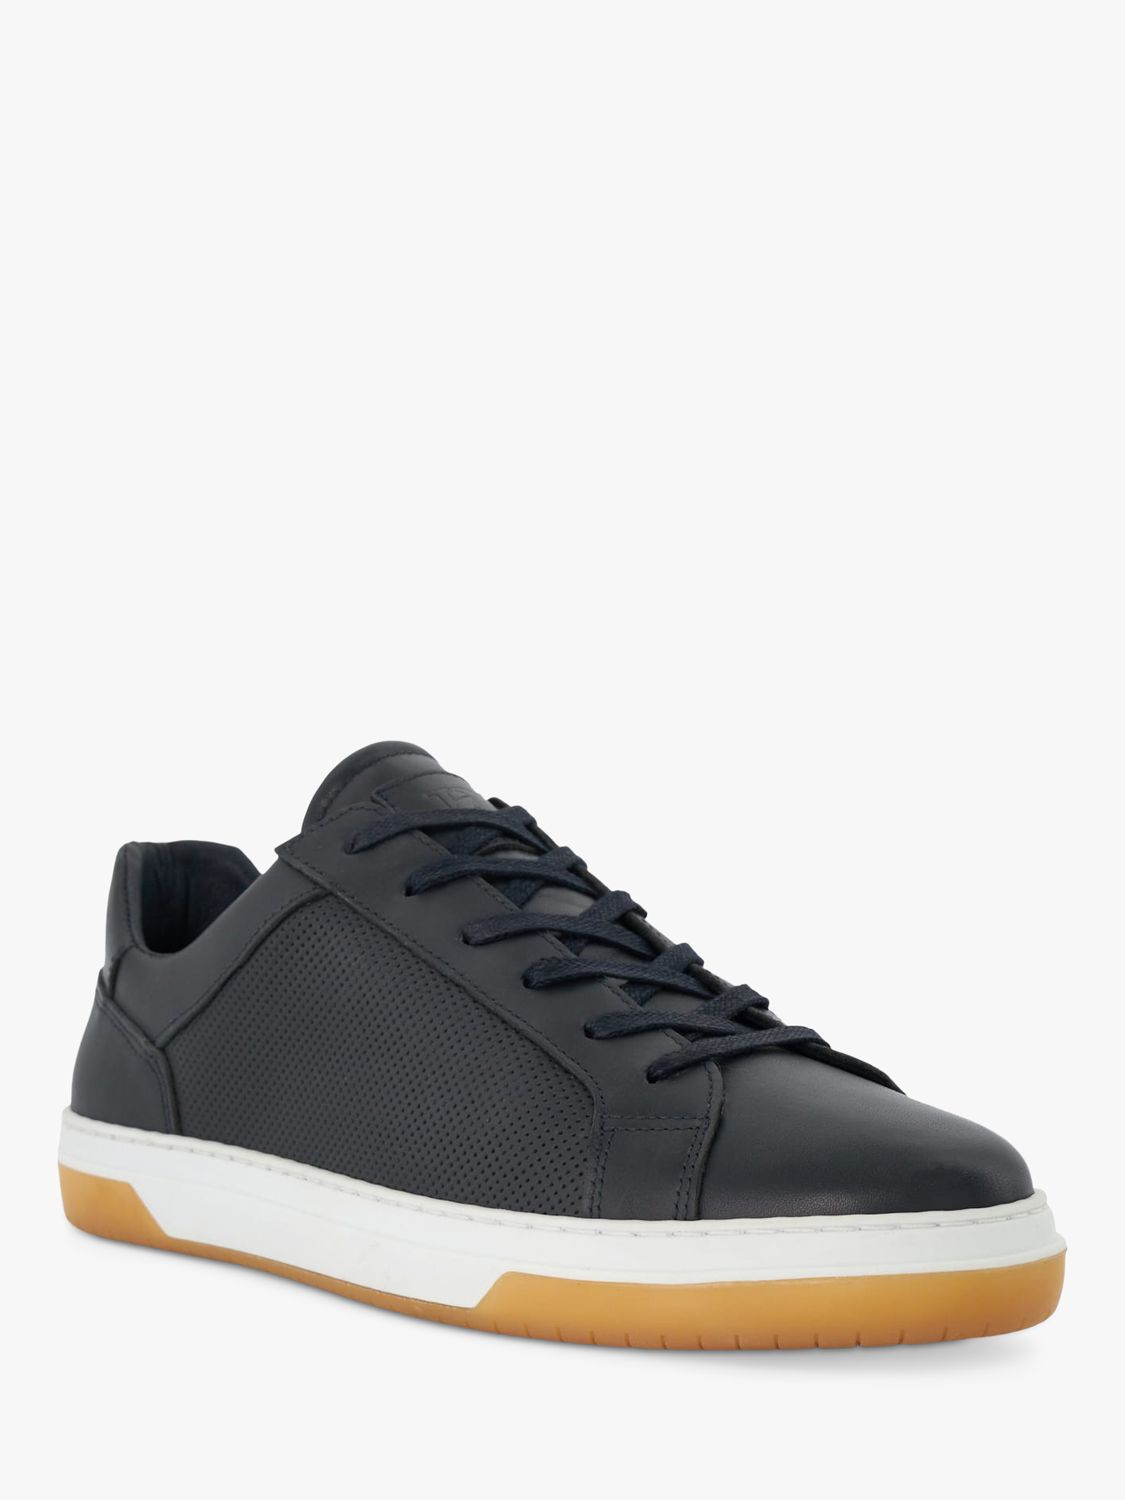 Buy Dune Tie Leather Black Trainers Online at johnlewis.com